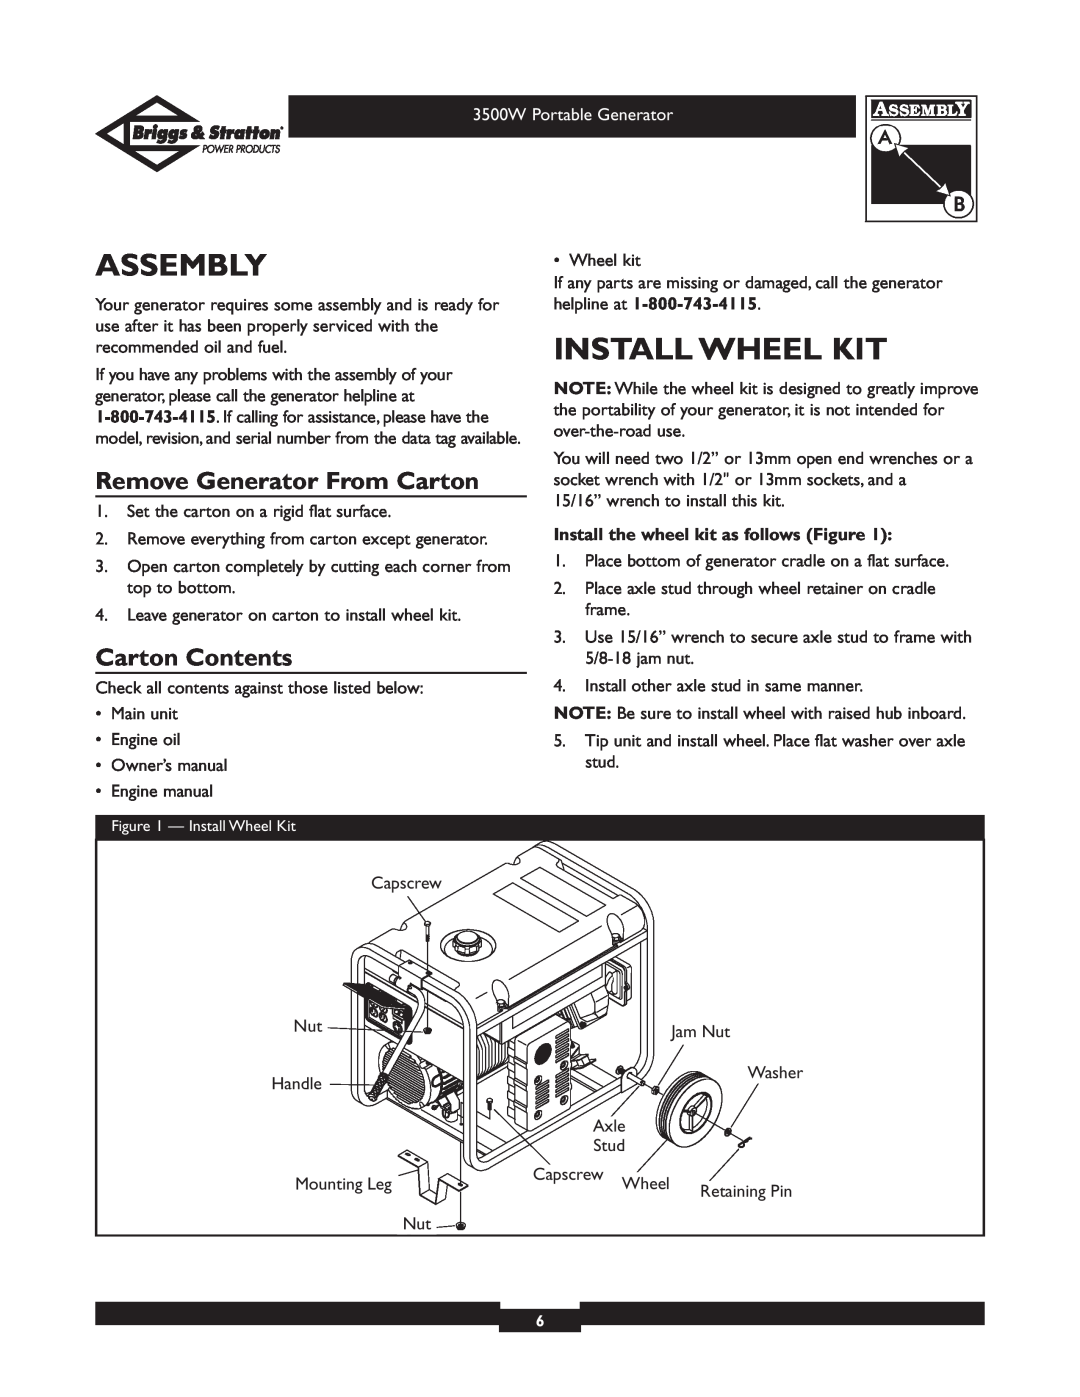 Briggs & Stratton 30208 owner manual Assembly, Install Wheel Kit, Remove Generator From Carton, Carton Contents 